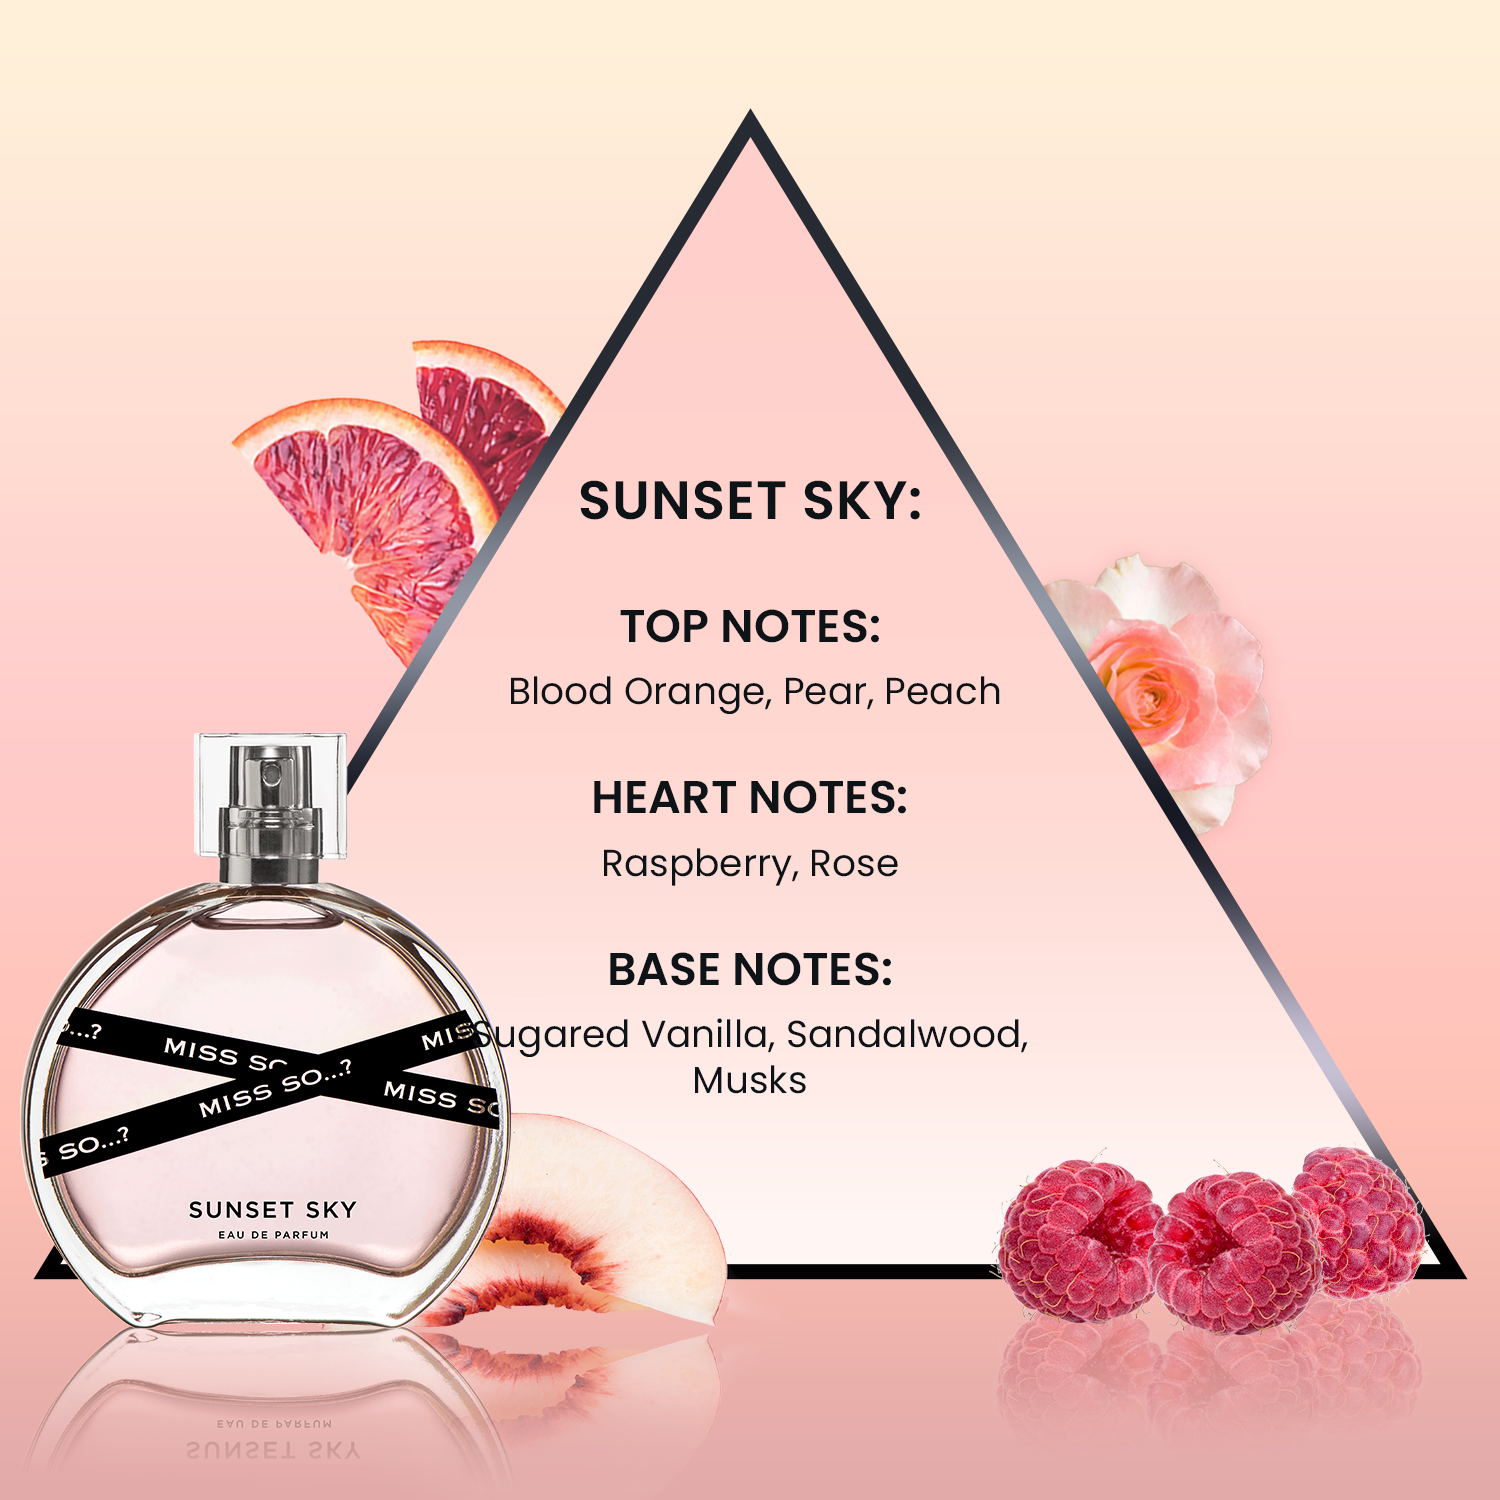 Love’s Kiss Perfume to open your heart to love and passion